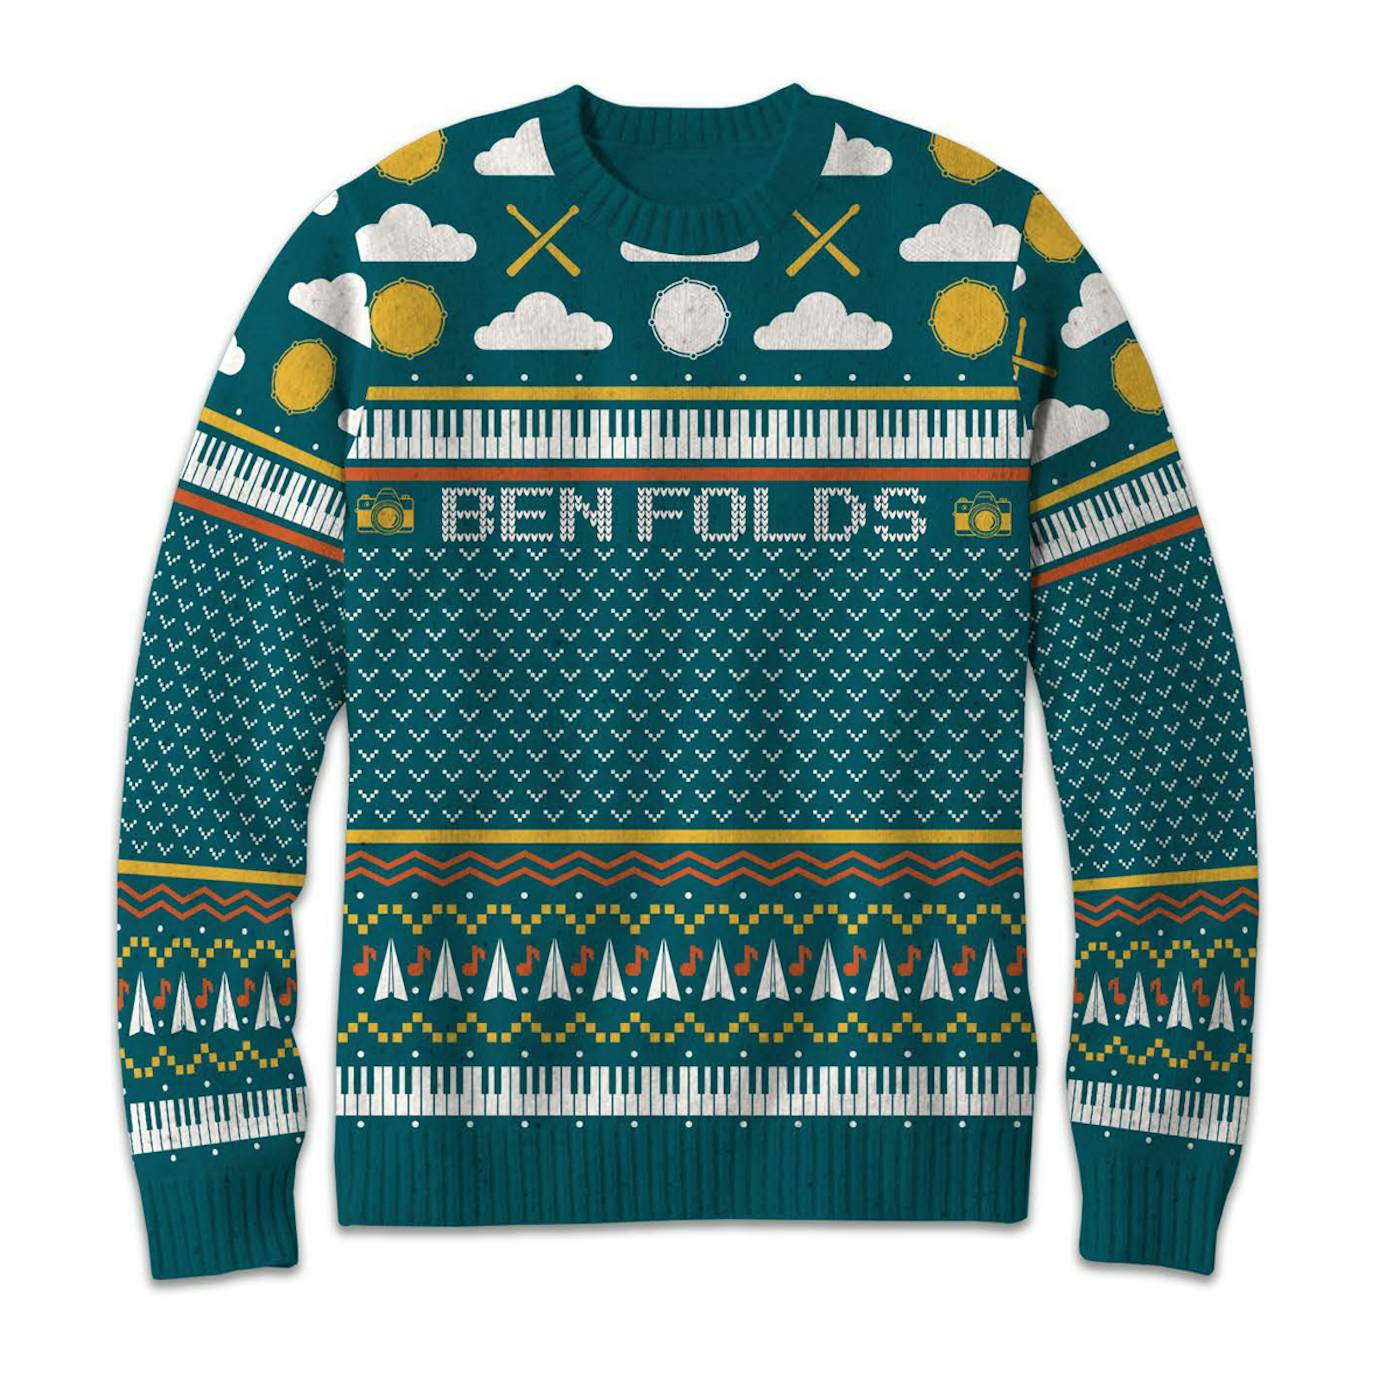 Ben Folds Ugly Sweater